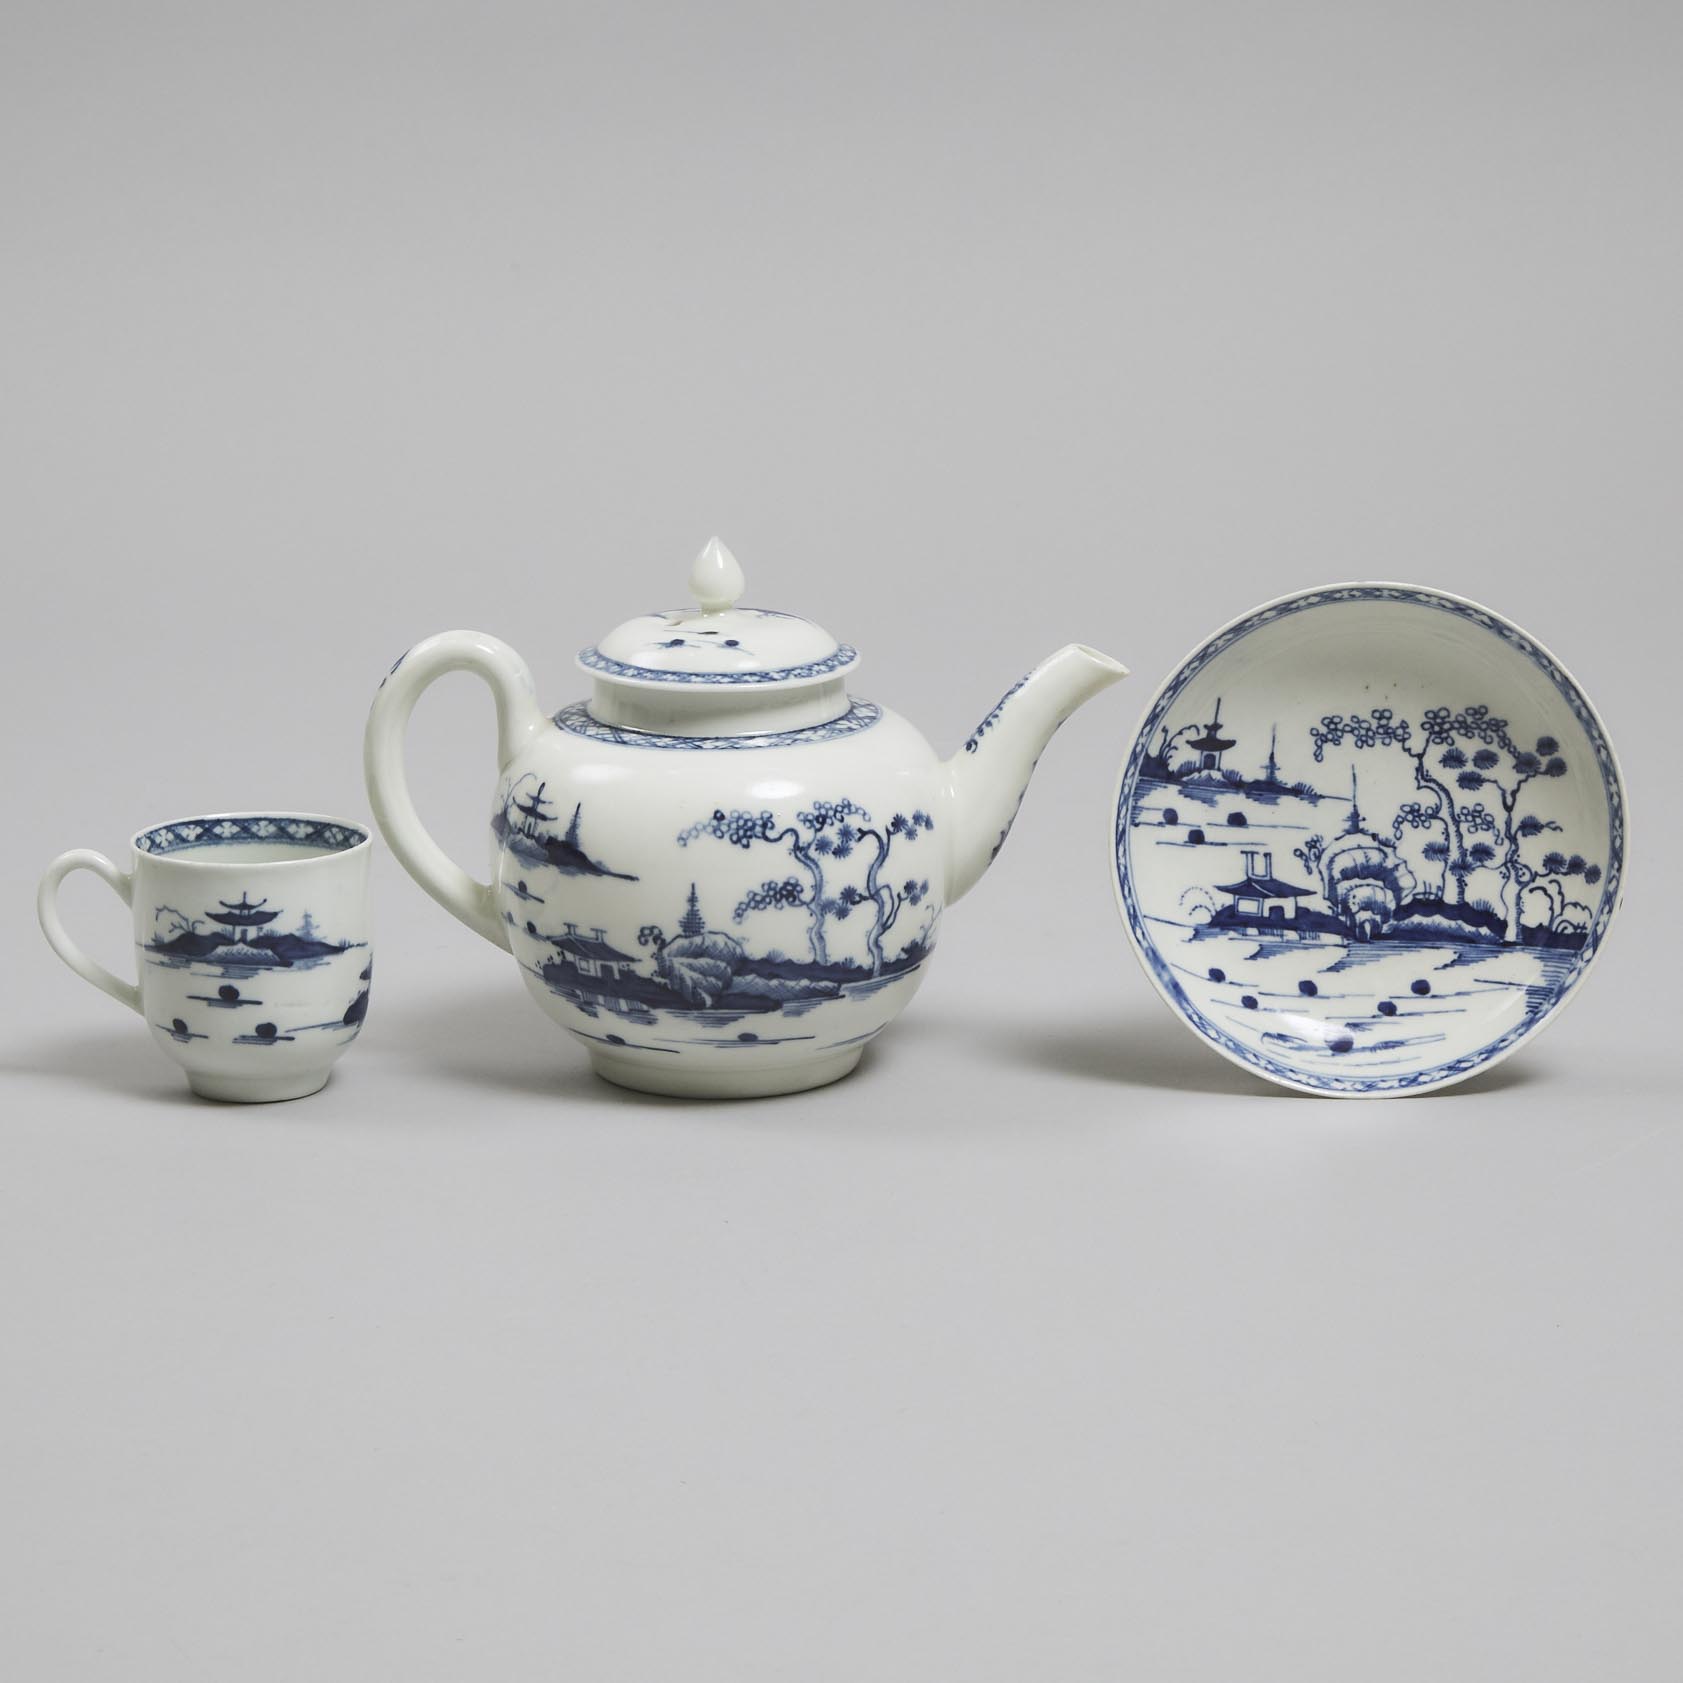 Worcester 'Cannonball' Pattern Teapot, Cup and Saucer, c.1770-80